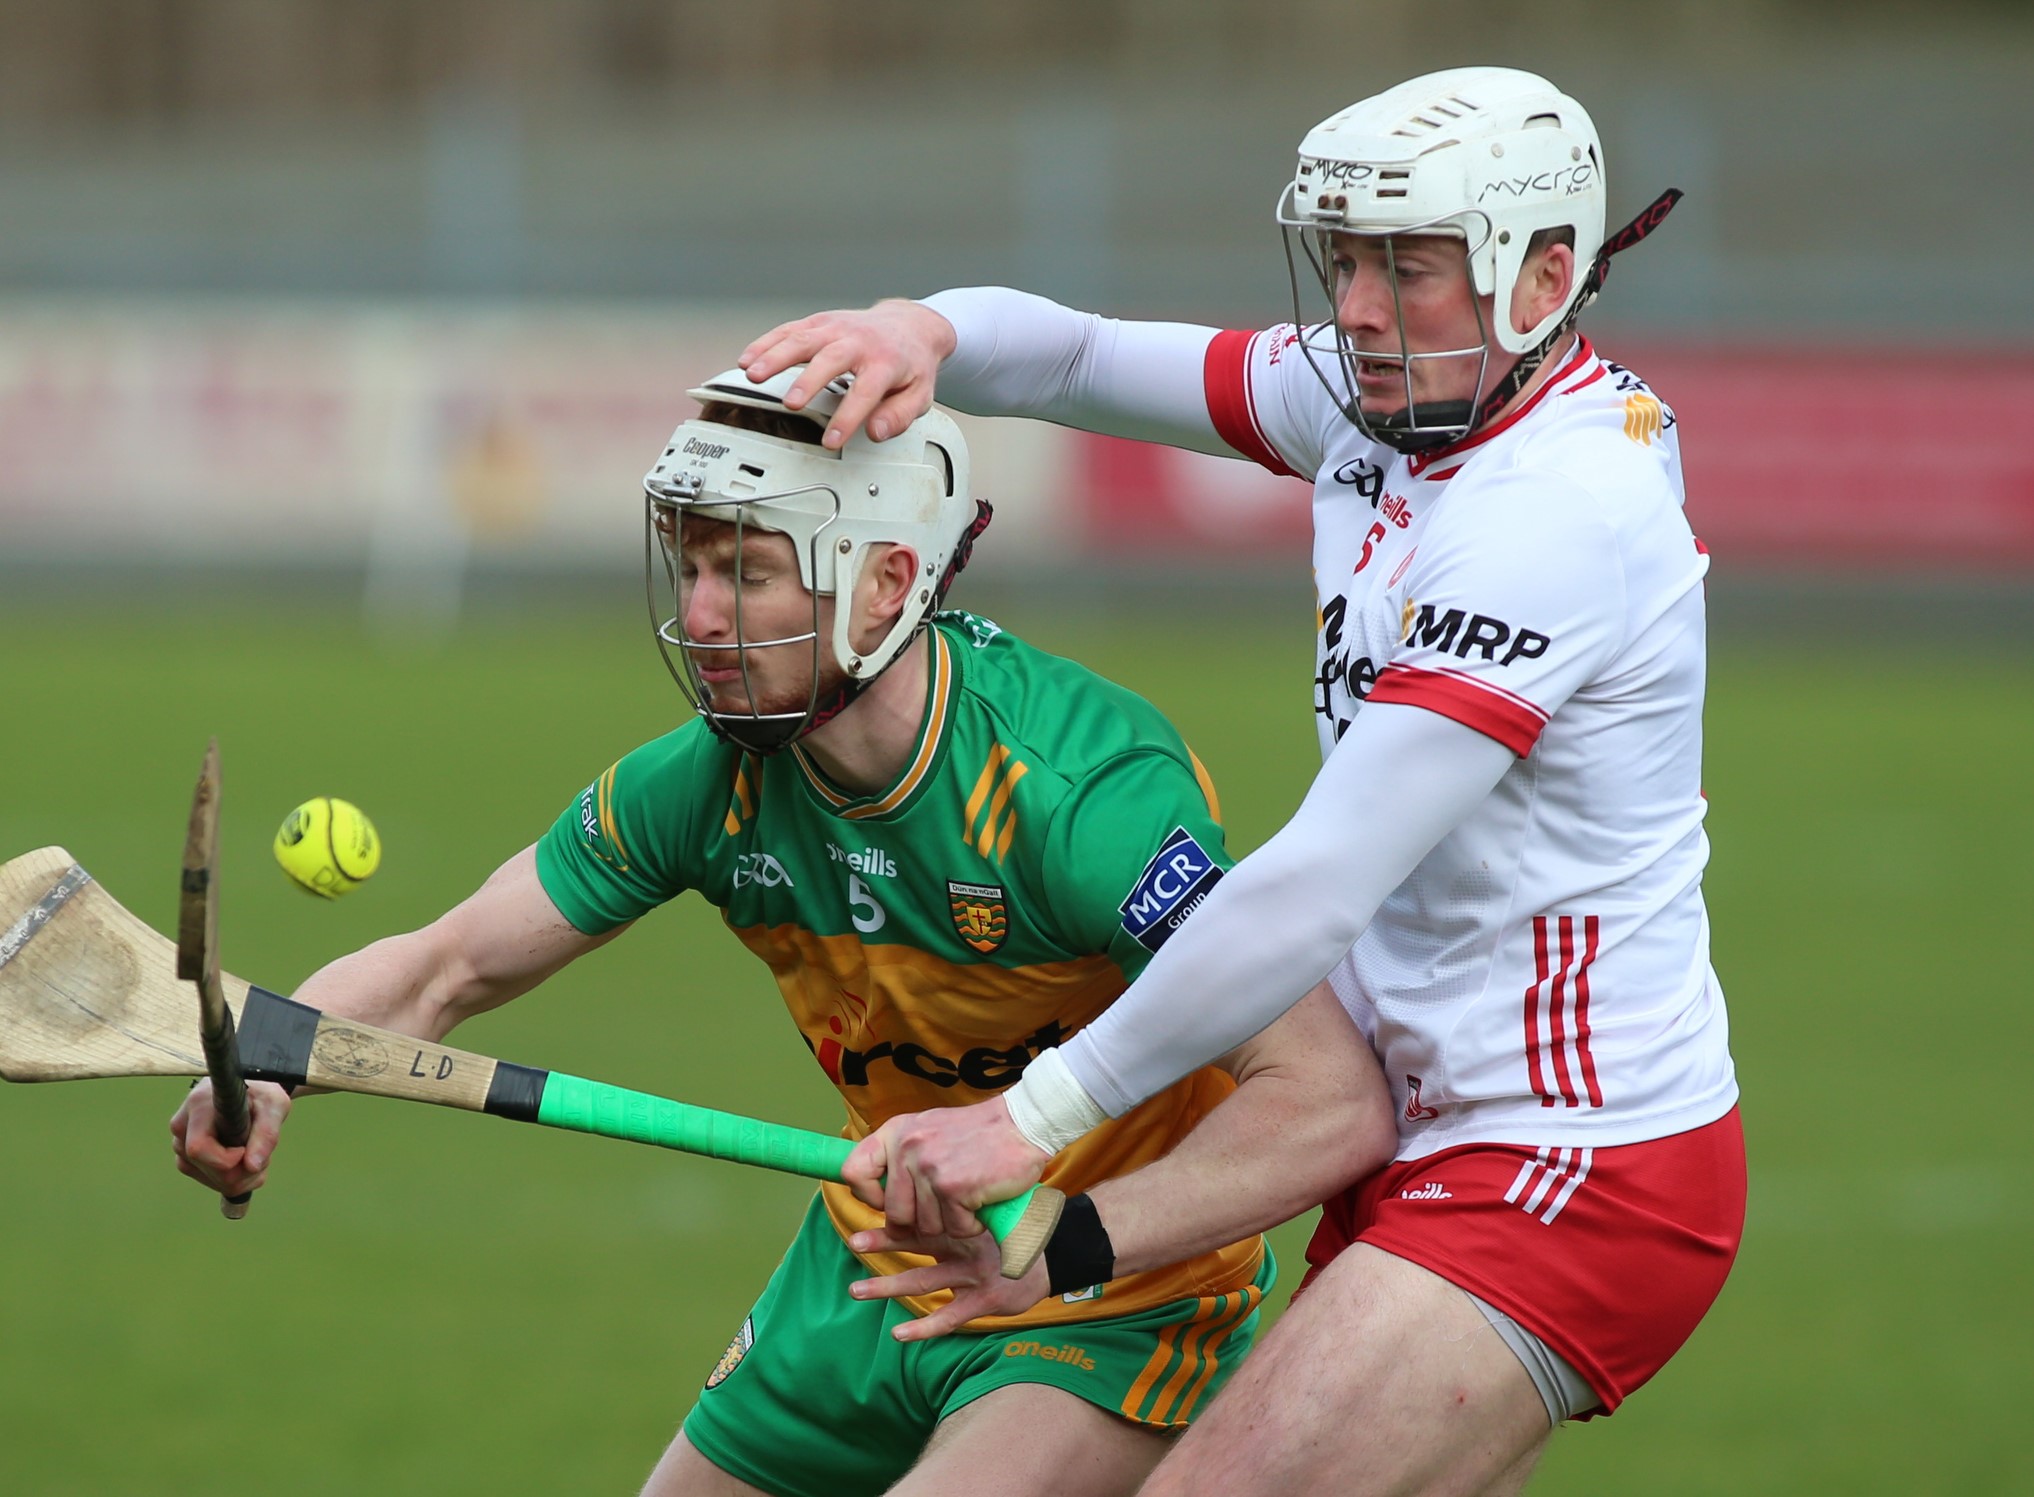 Entertaining eight goal clash sees Tyrone hurlers into final